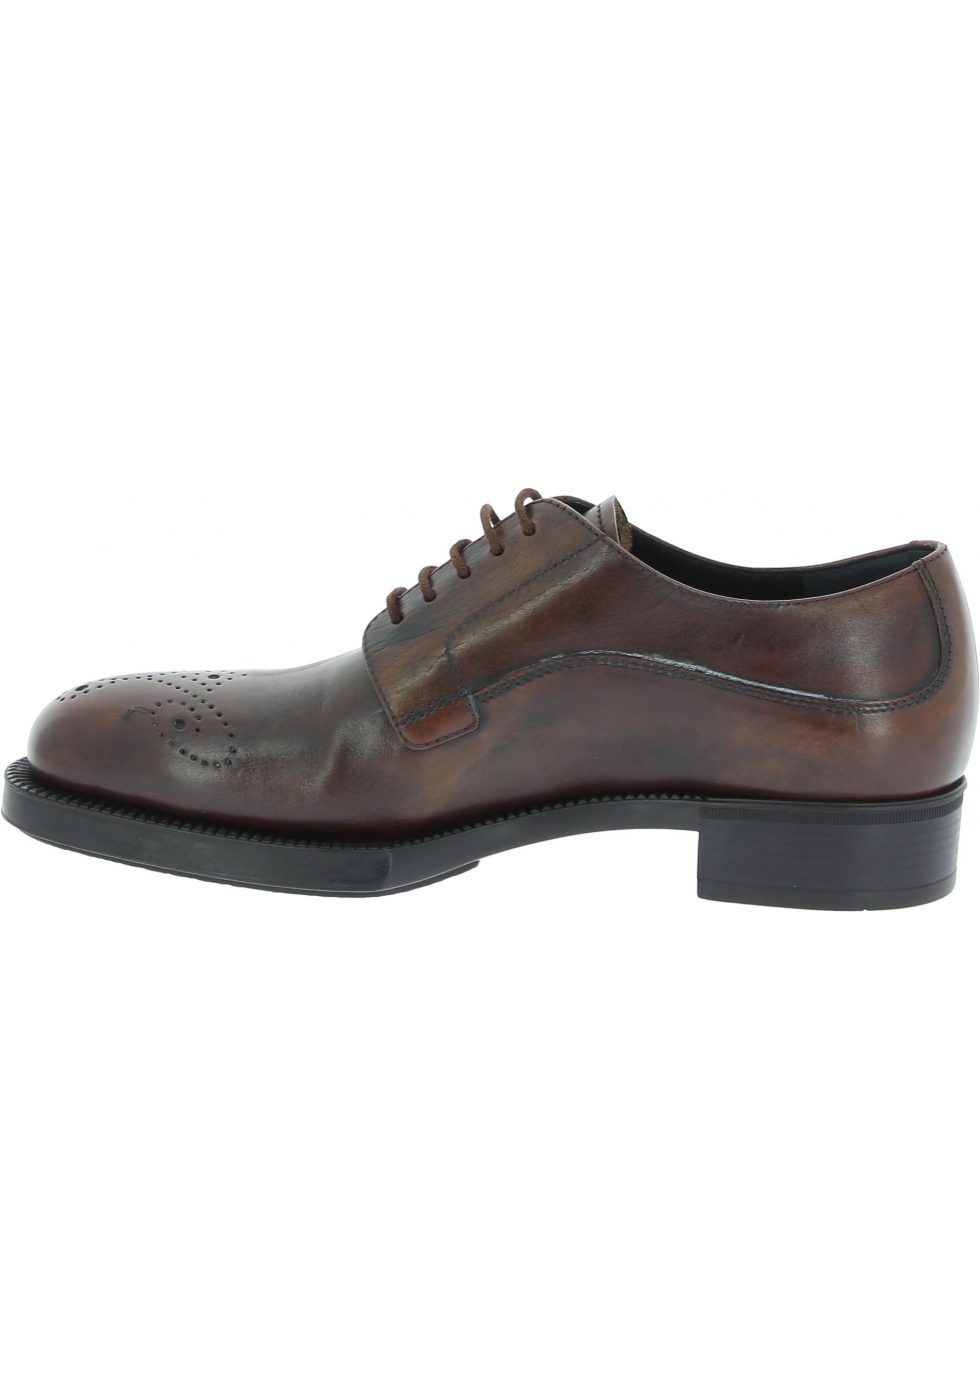 Prada Women fashion brogues Oxford laced-up shoes in dark brown calf leather - Italian Boutique